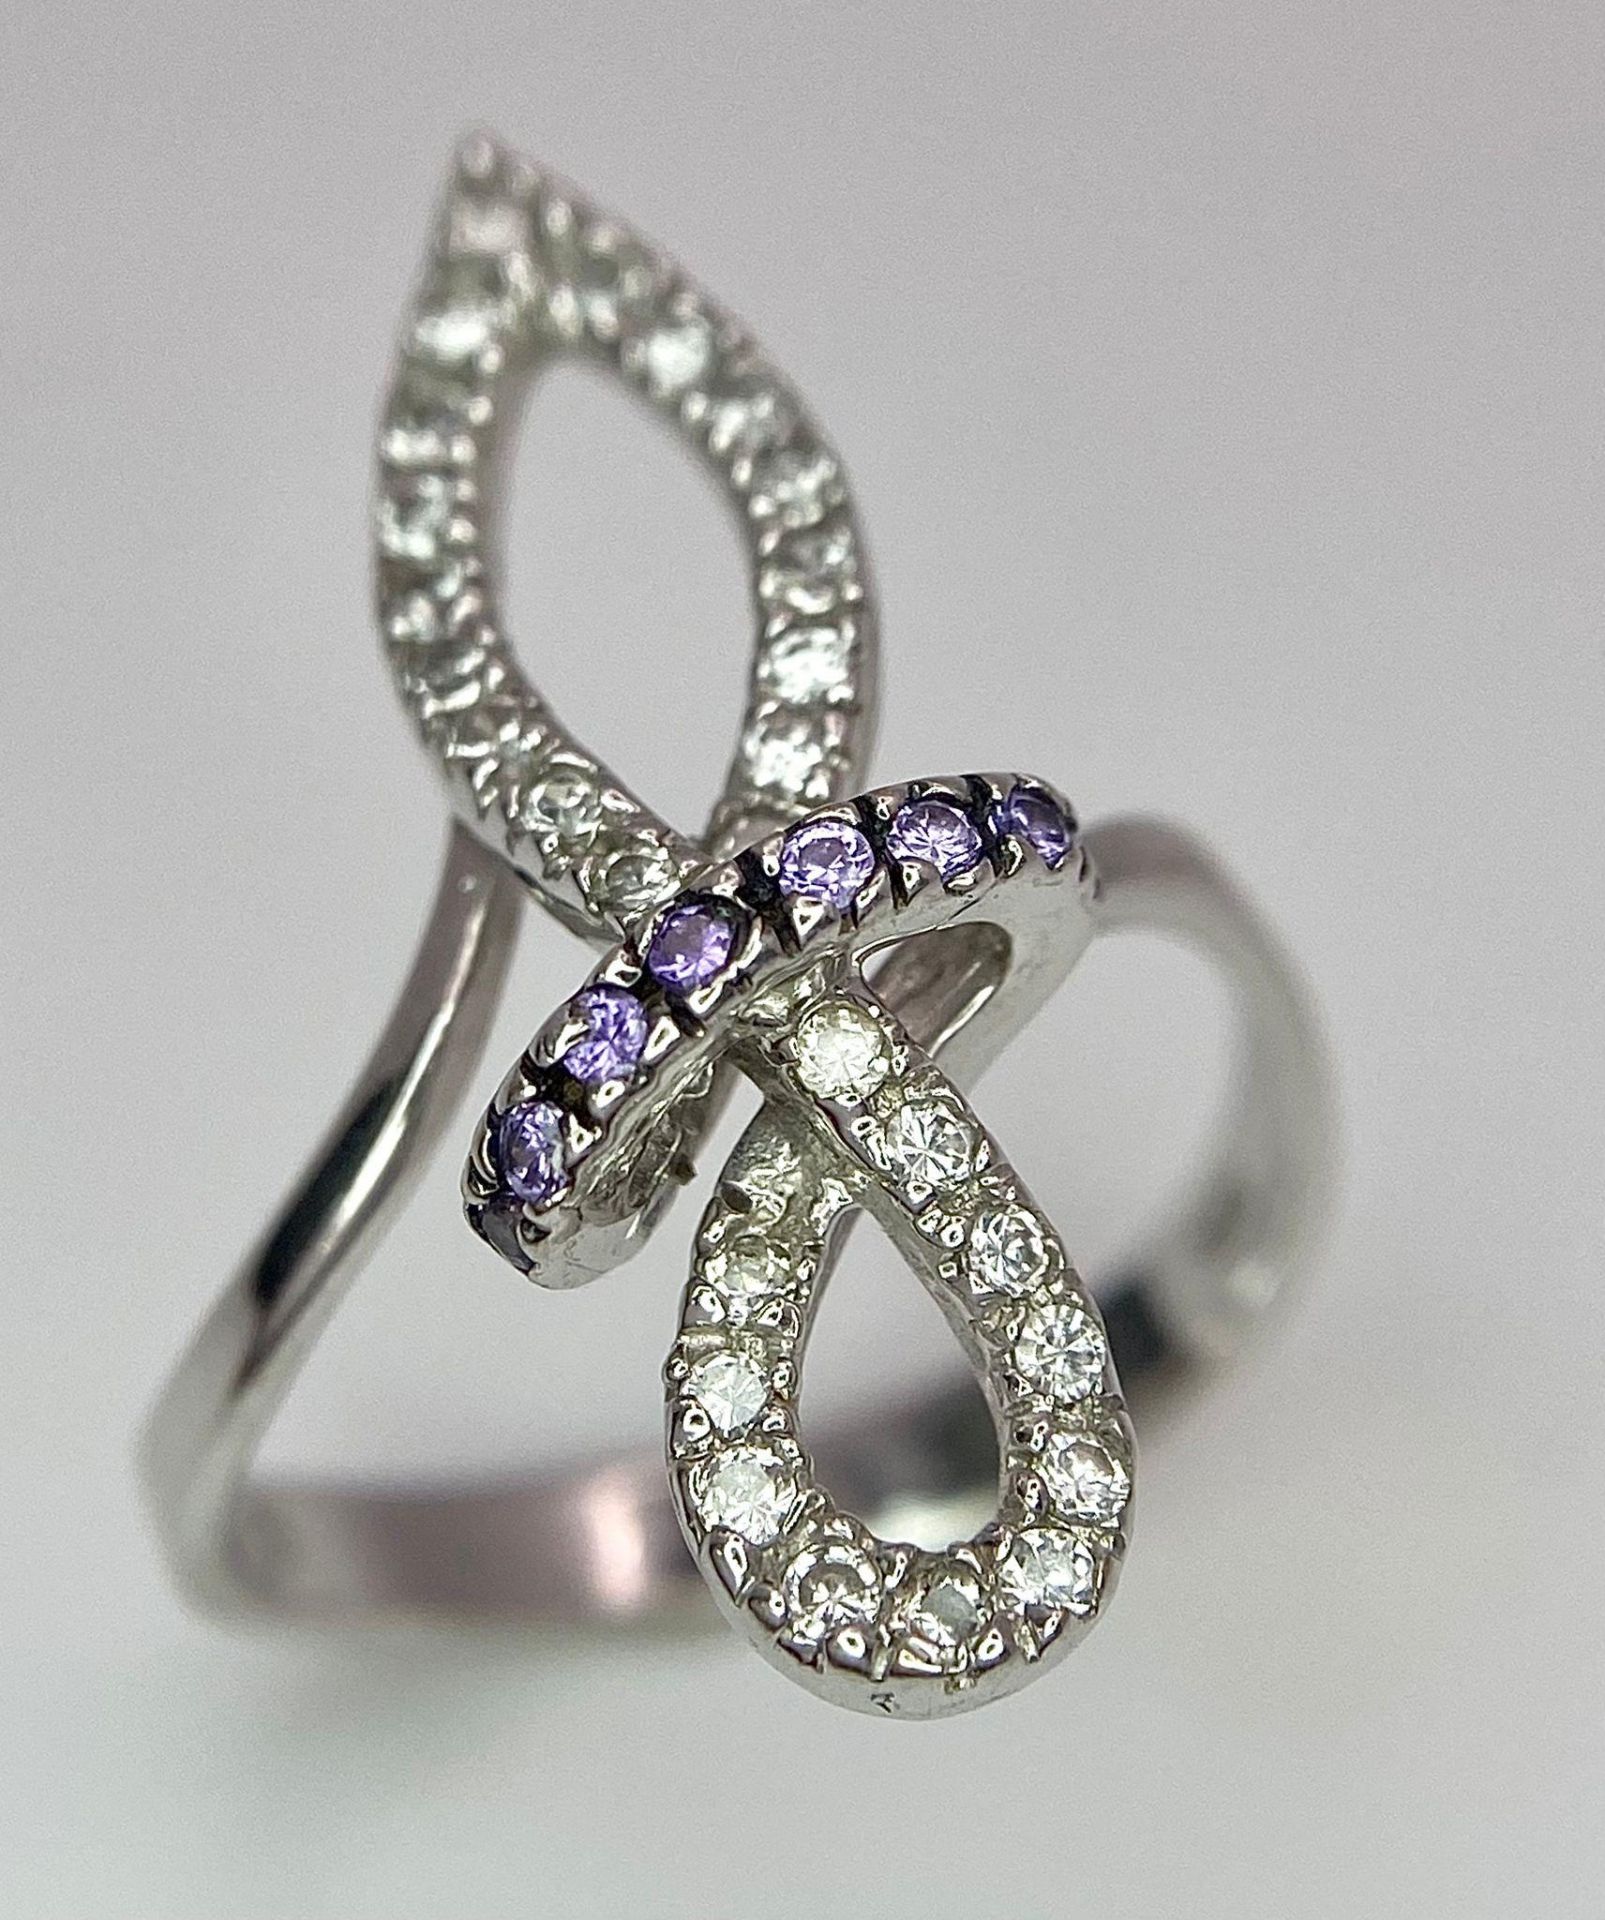 An 18K White Gold CZ Fancy Knot Ring. Size O. 3.9g weight. - Image 4 of 7